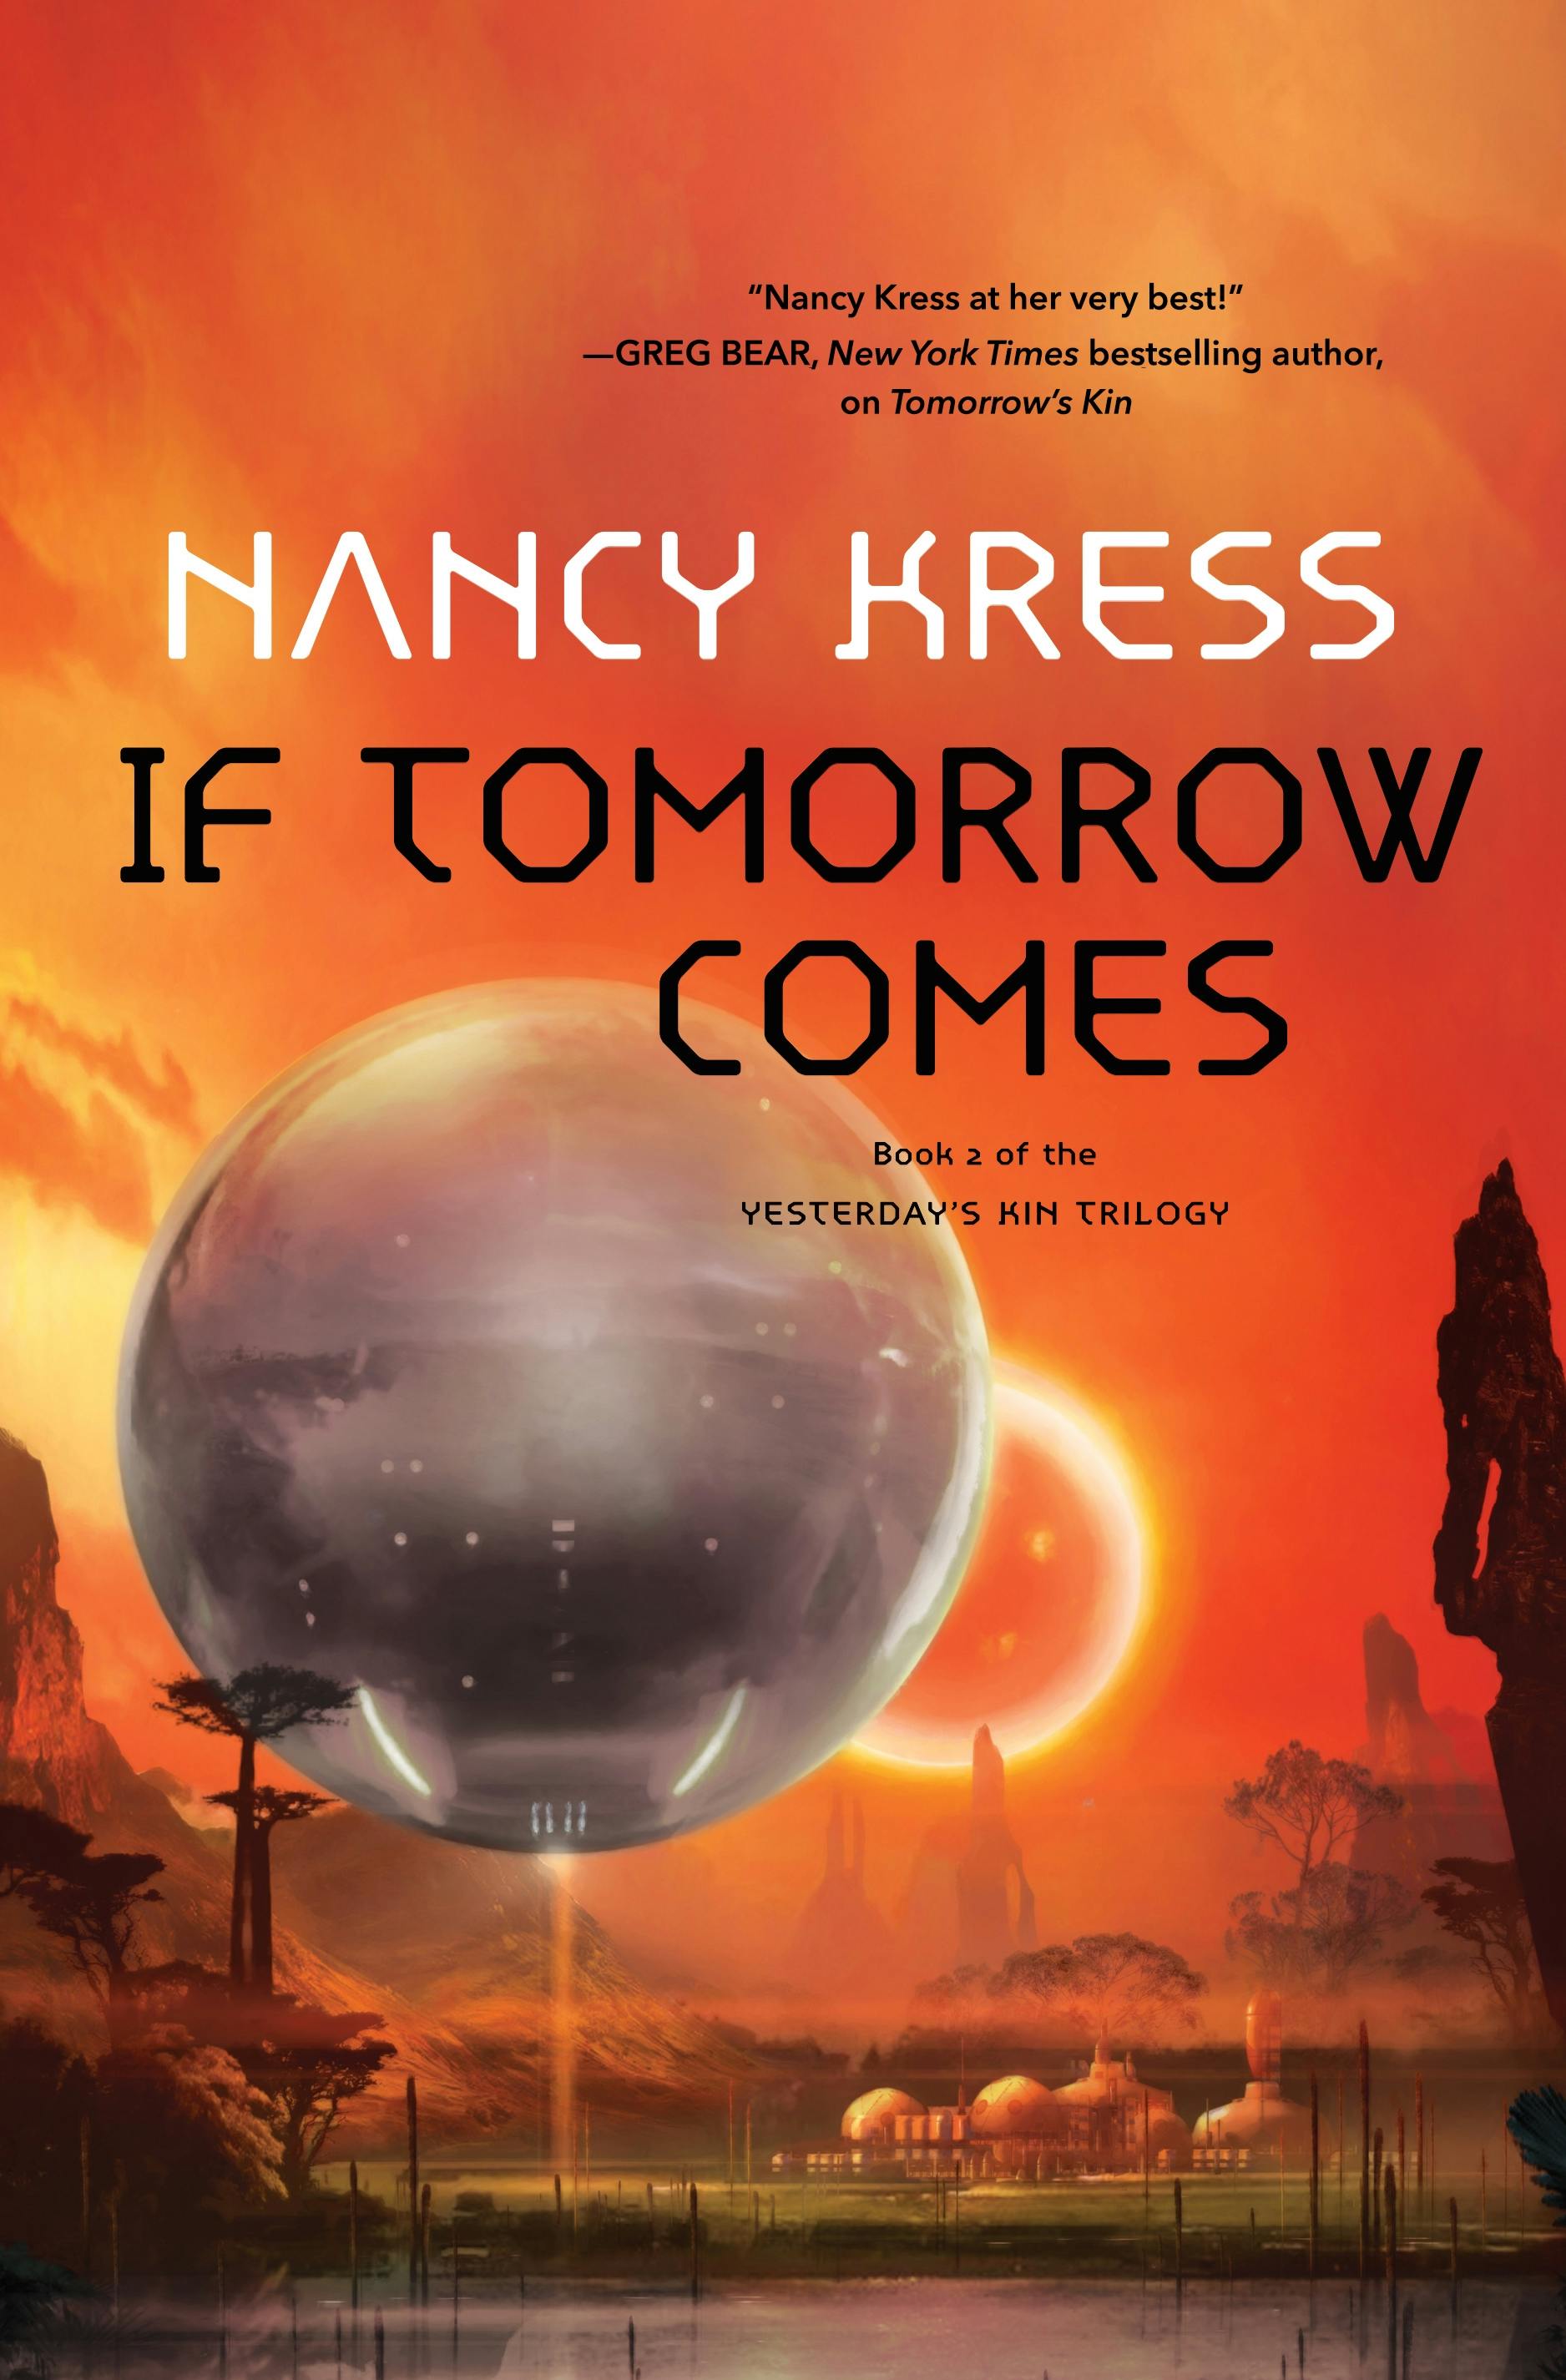 Cover for the book titled as: If Tomorrow Comes